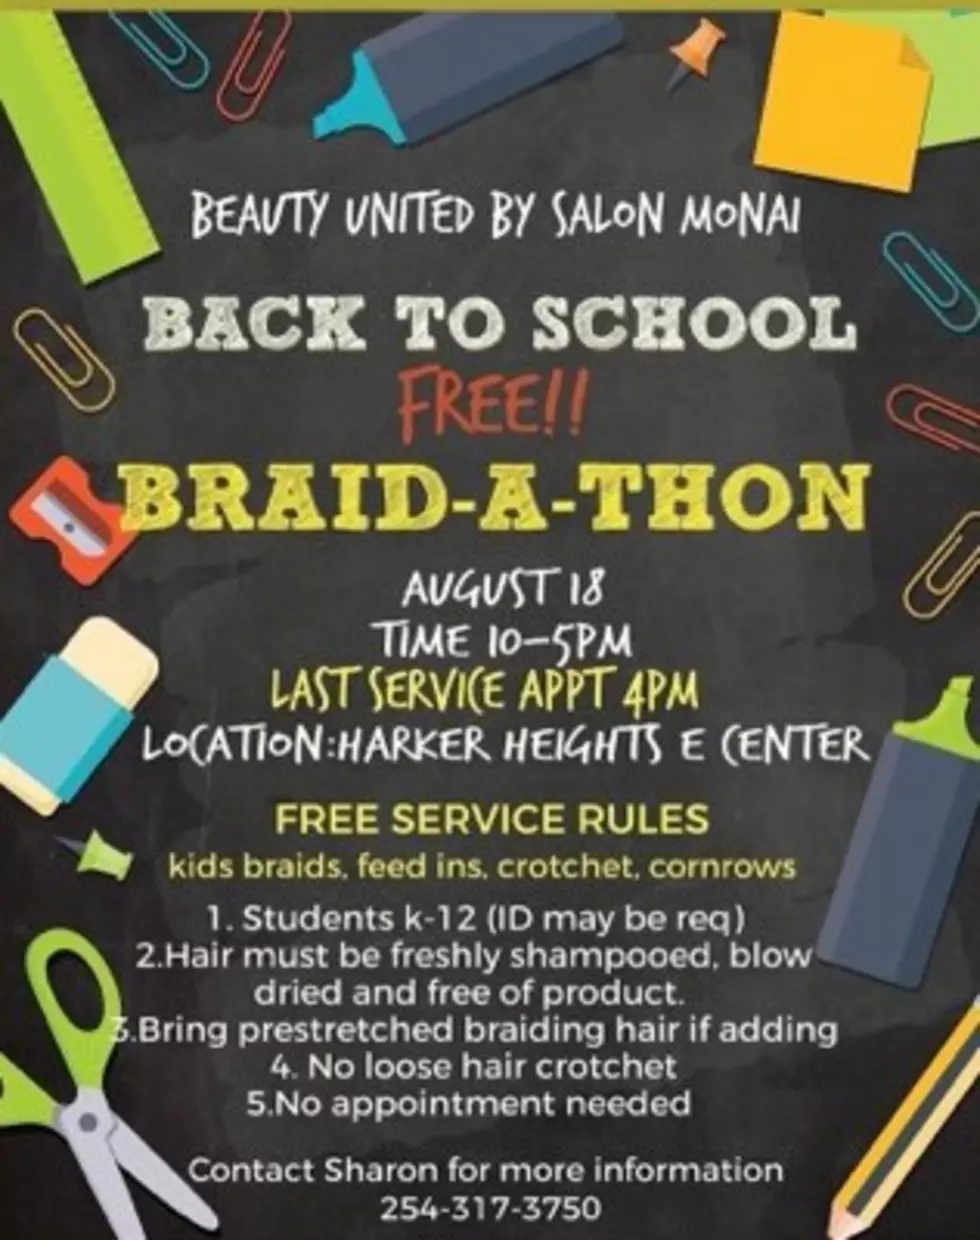 Beauty Salon in Killeen holding a Free Back To School Braid -A-Thon